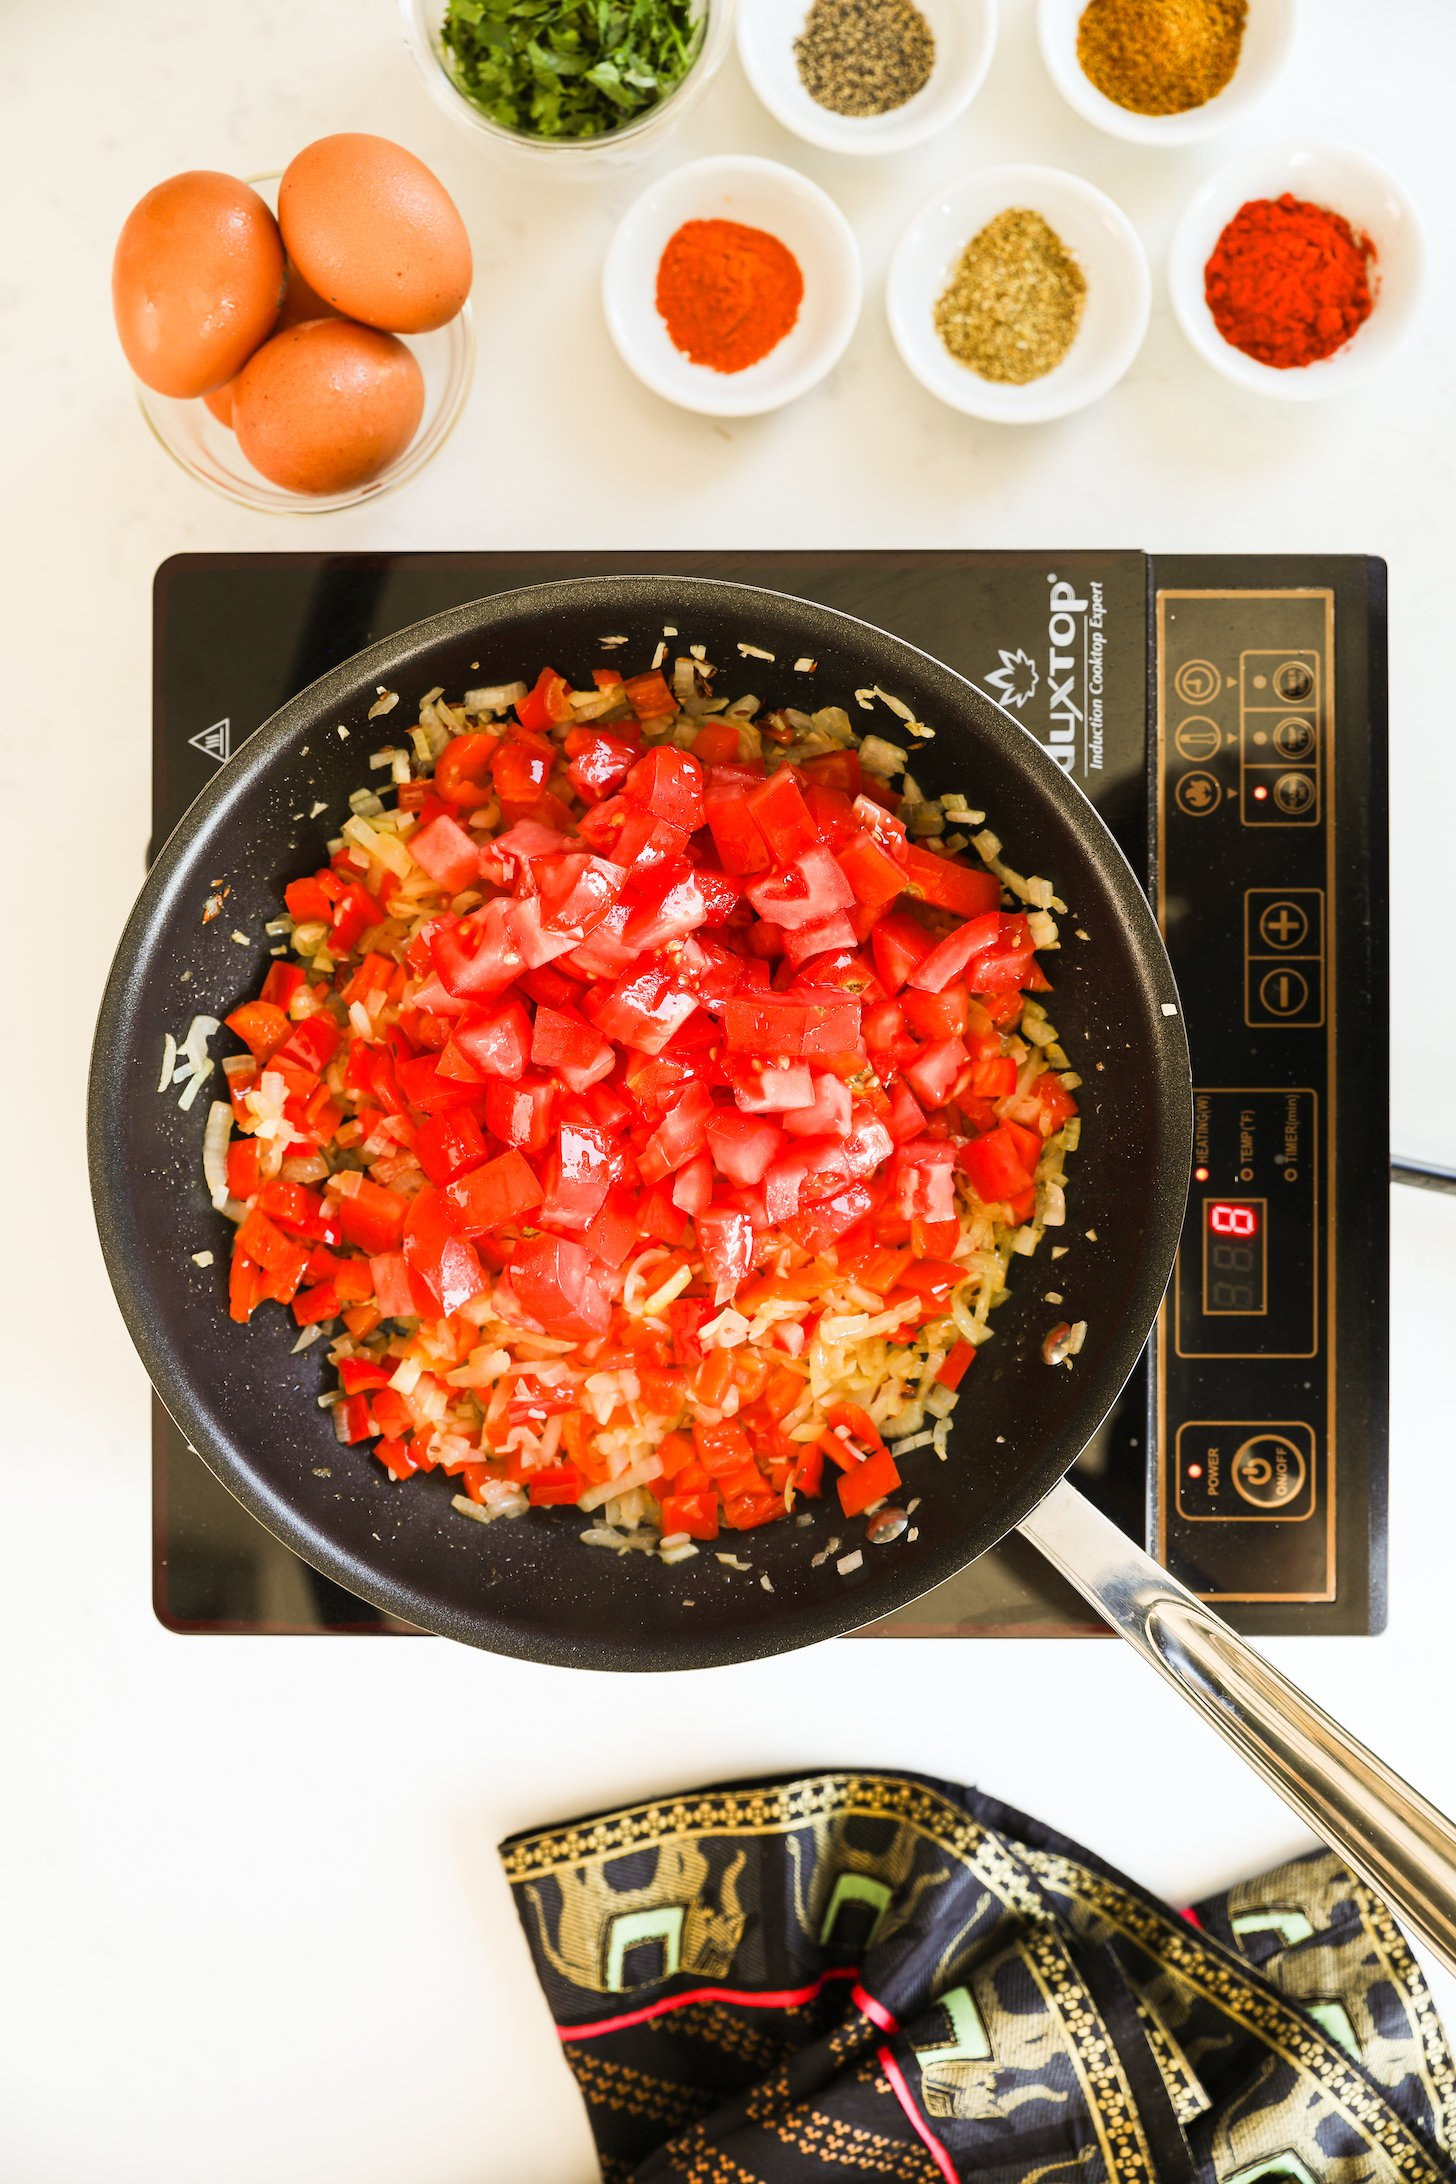 Overhead view of a pan of chopped peppers, tomatoes and onion frying in oil.